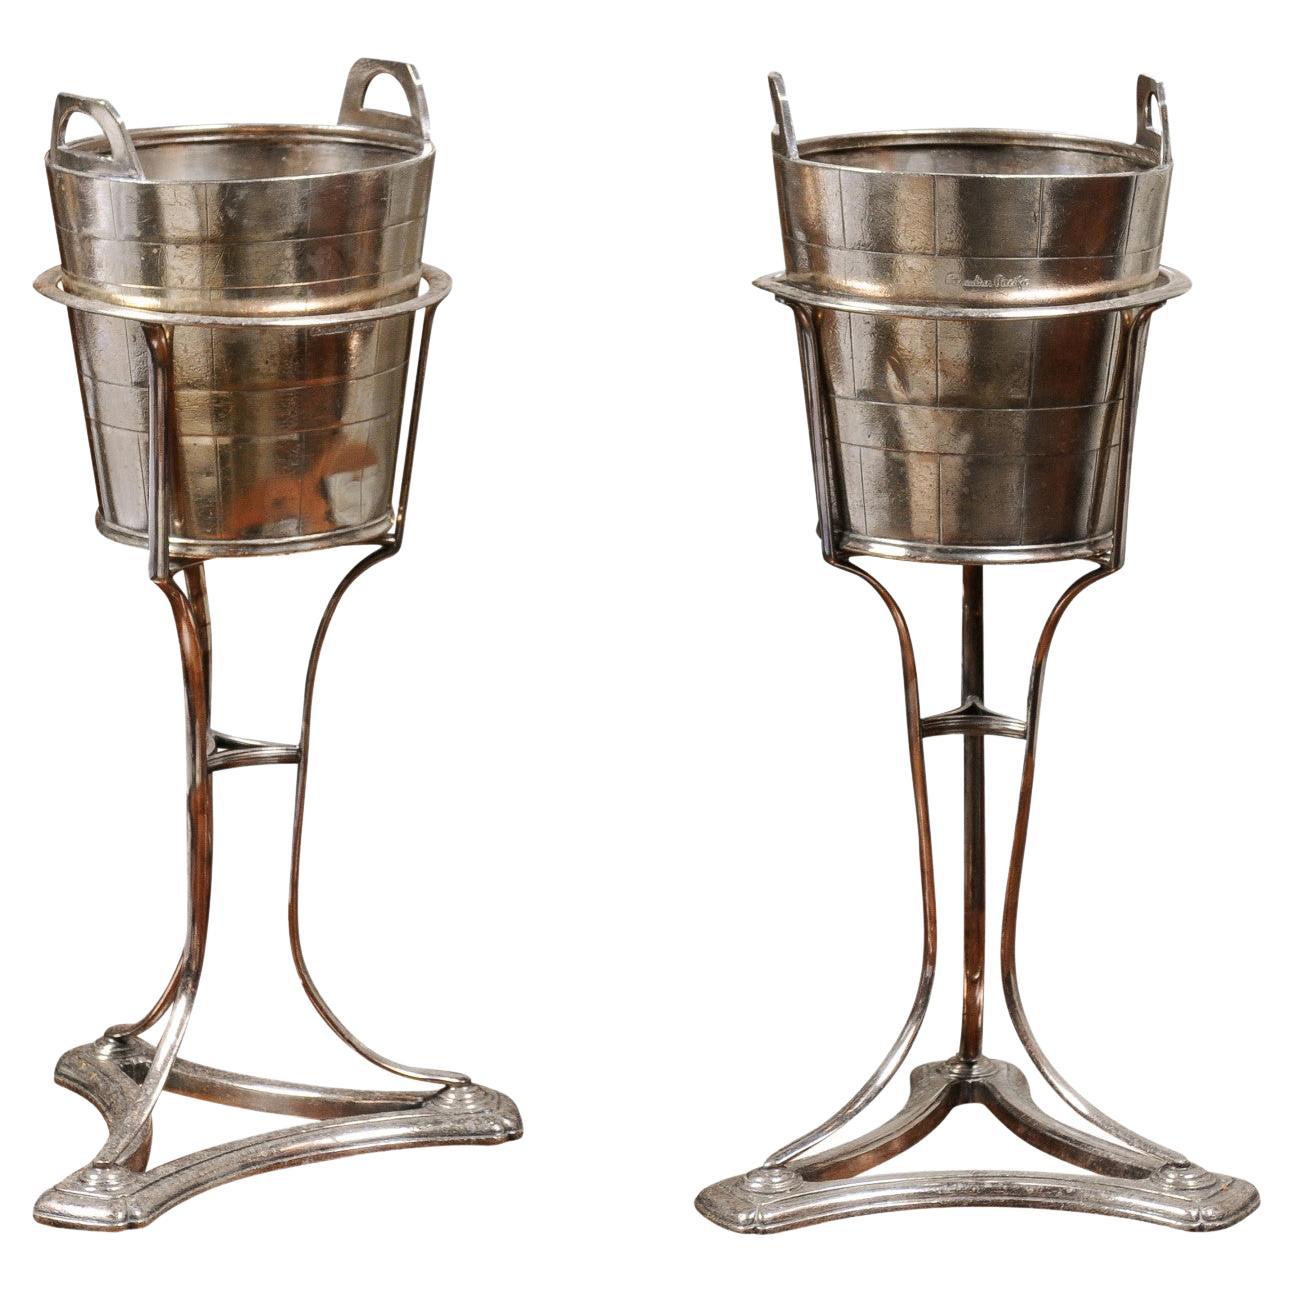 English Silver Plated Champagne Buckets Made for the Canadian Pacific Railway